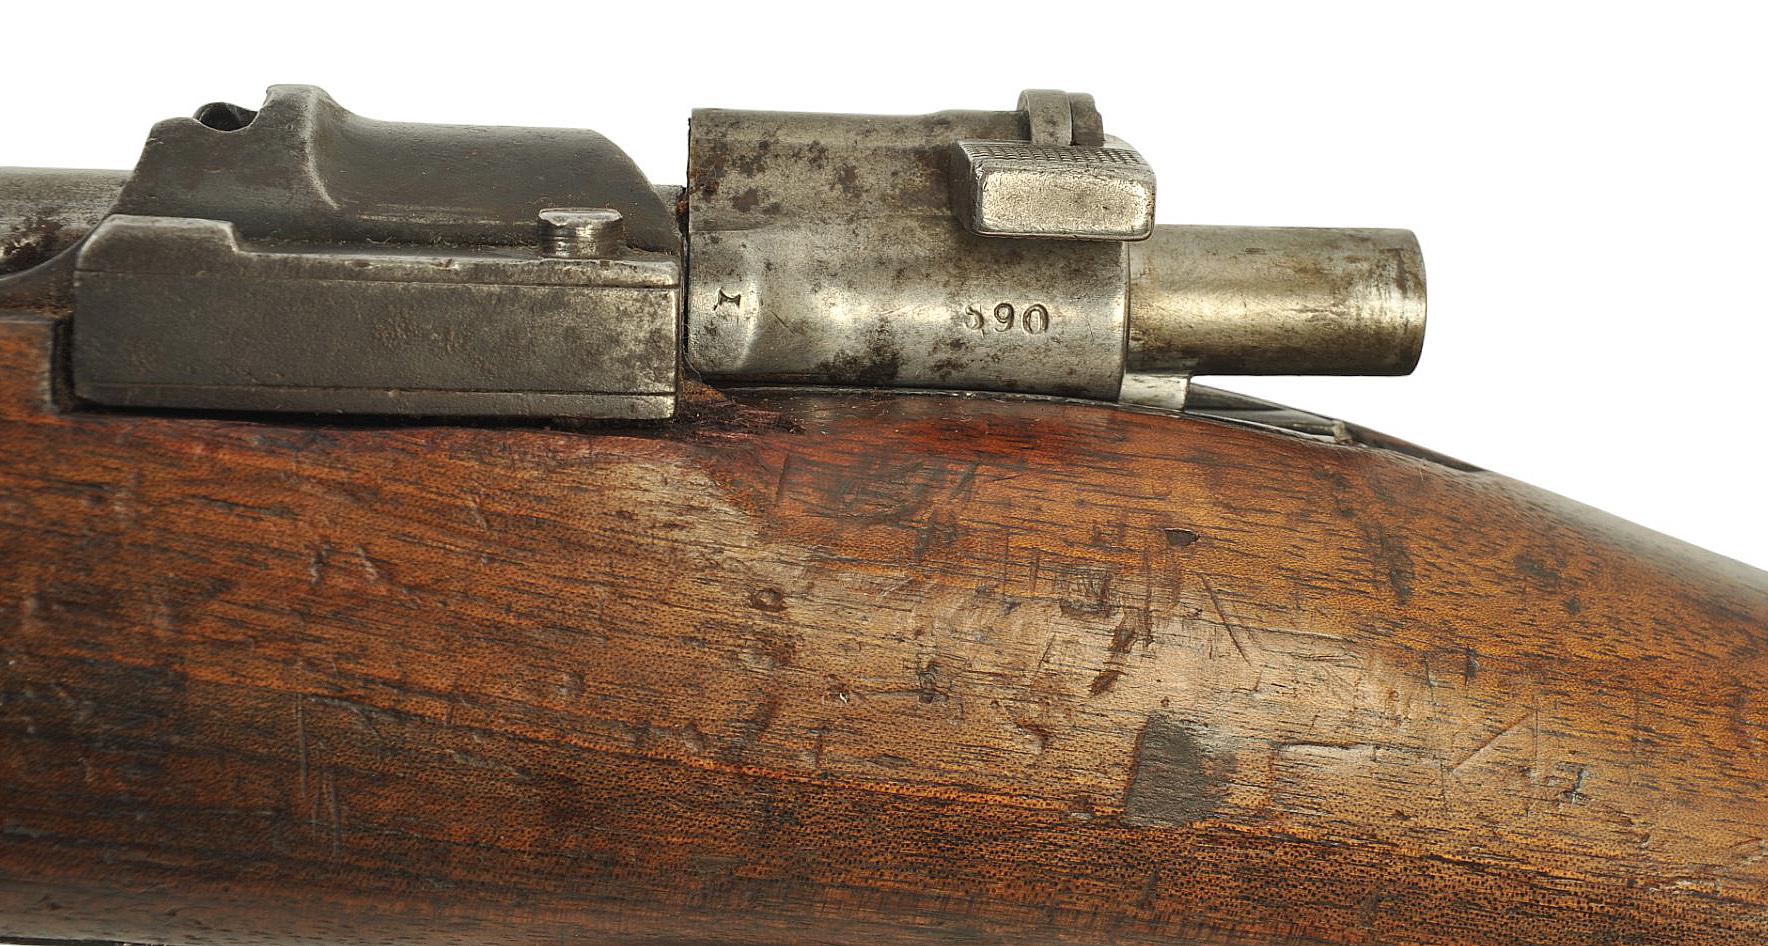 Spanish Model 1895 Short Rifle 7x57MM Bolt-action Rifle FFL Required: A2586 (AH1)